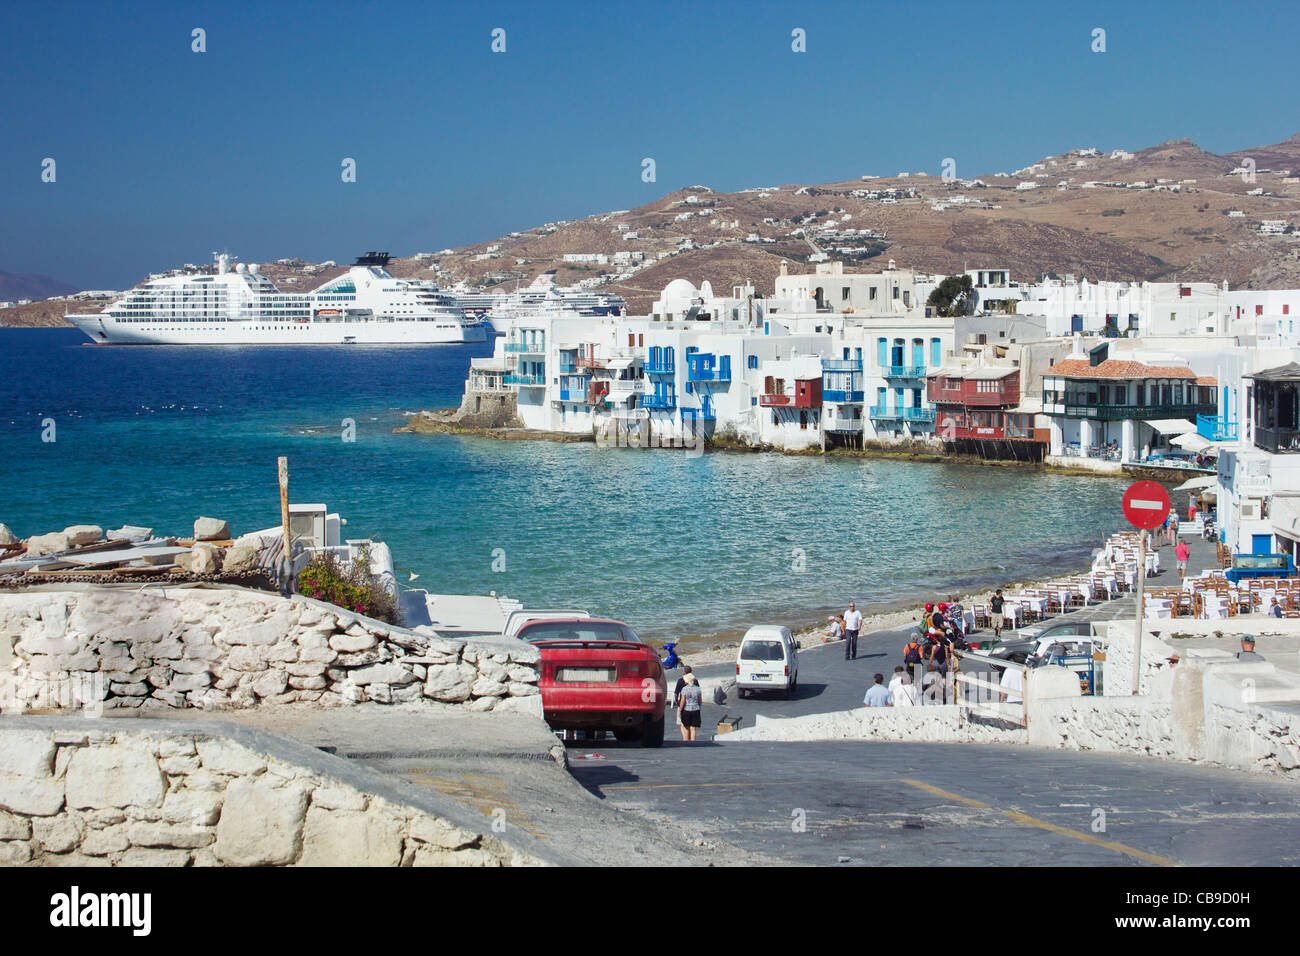 Cruise ship docked in the harbor of Mykonos, Greece. Stock Photo